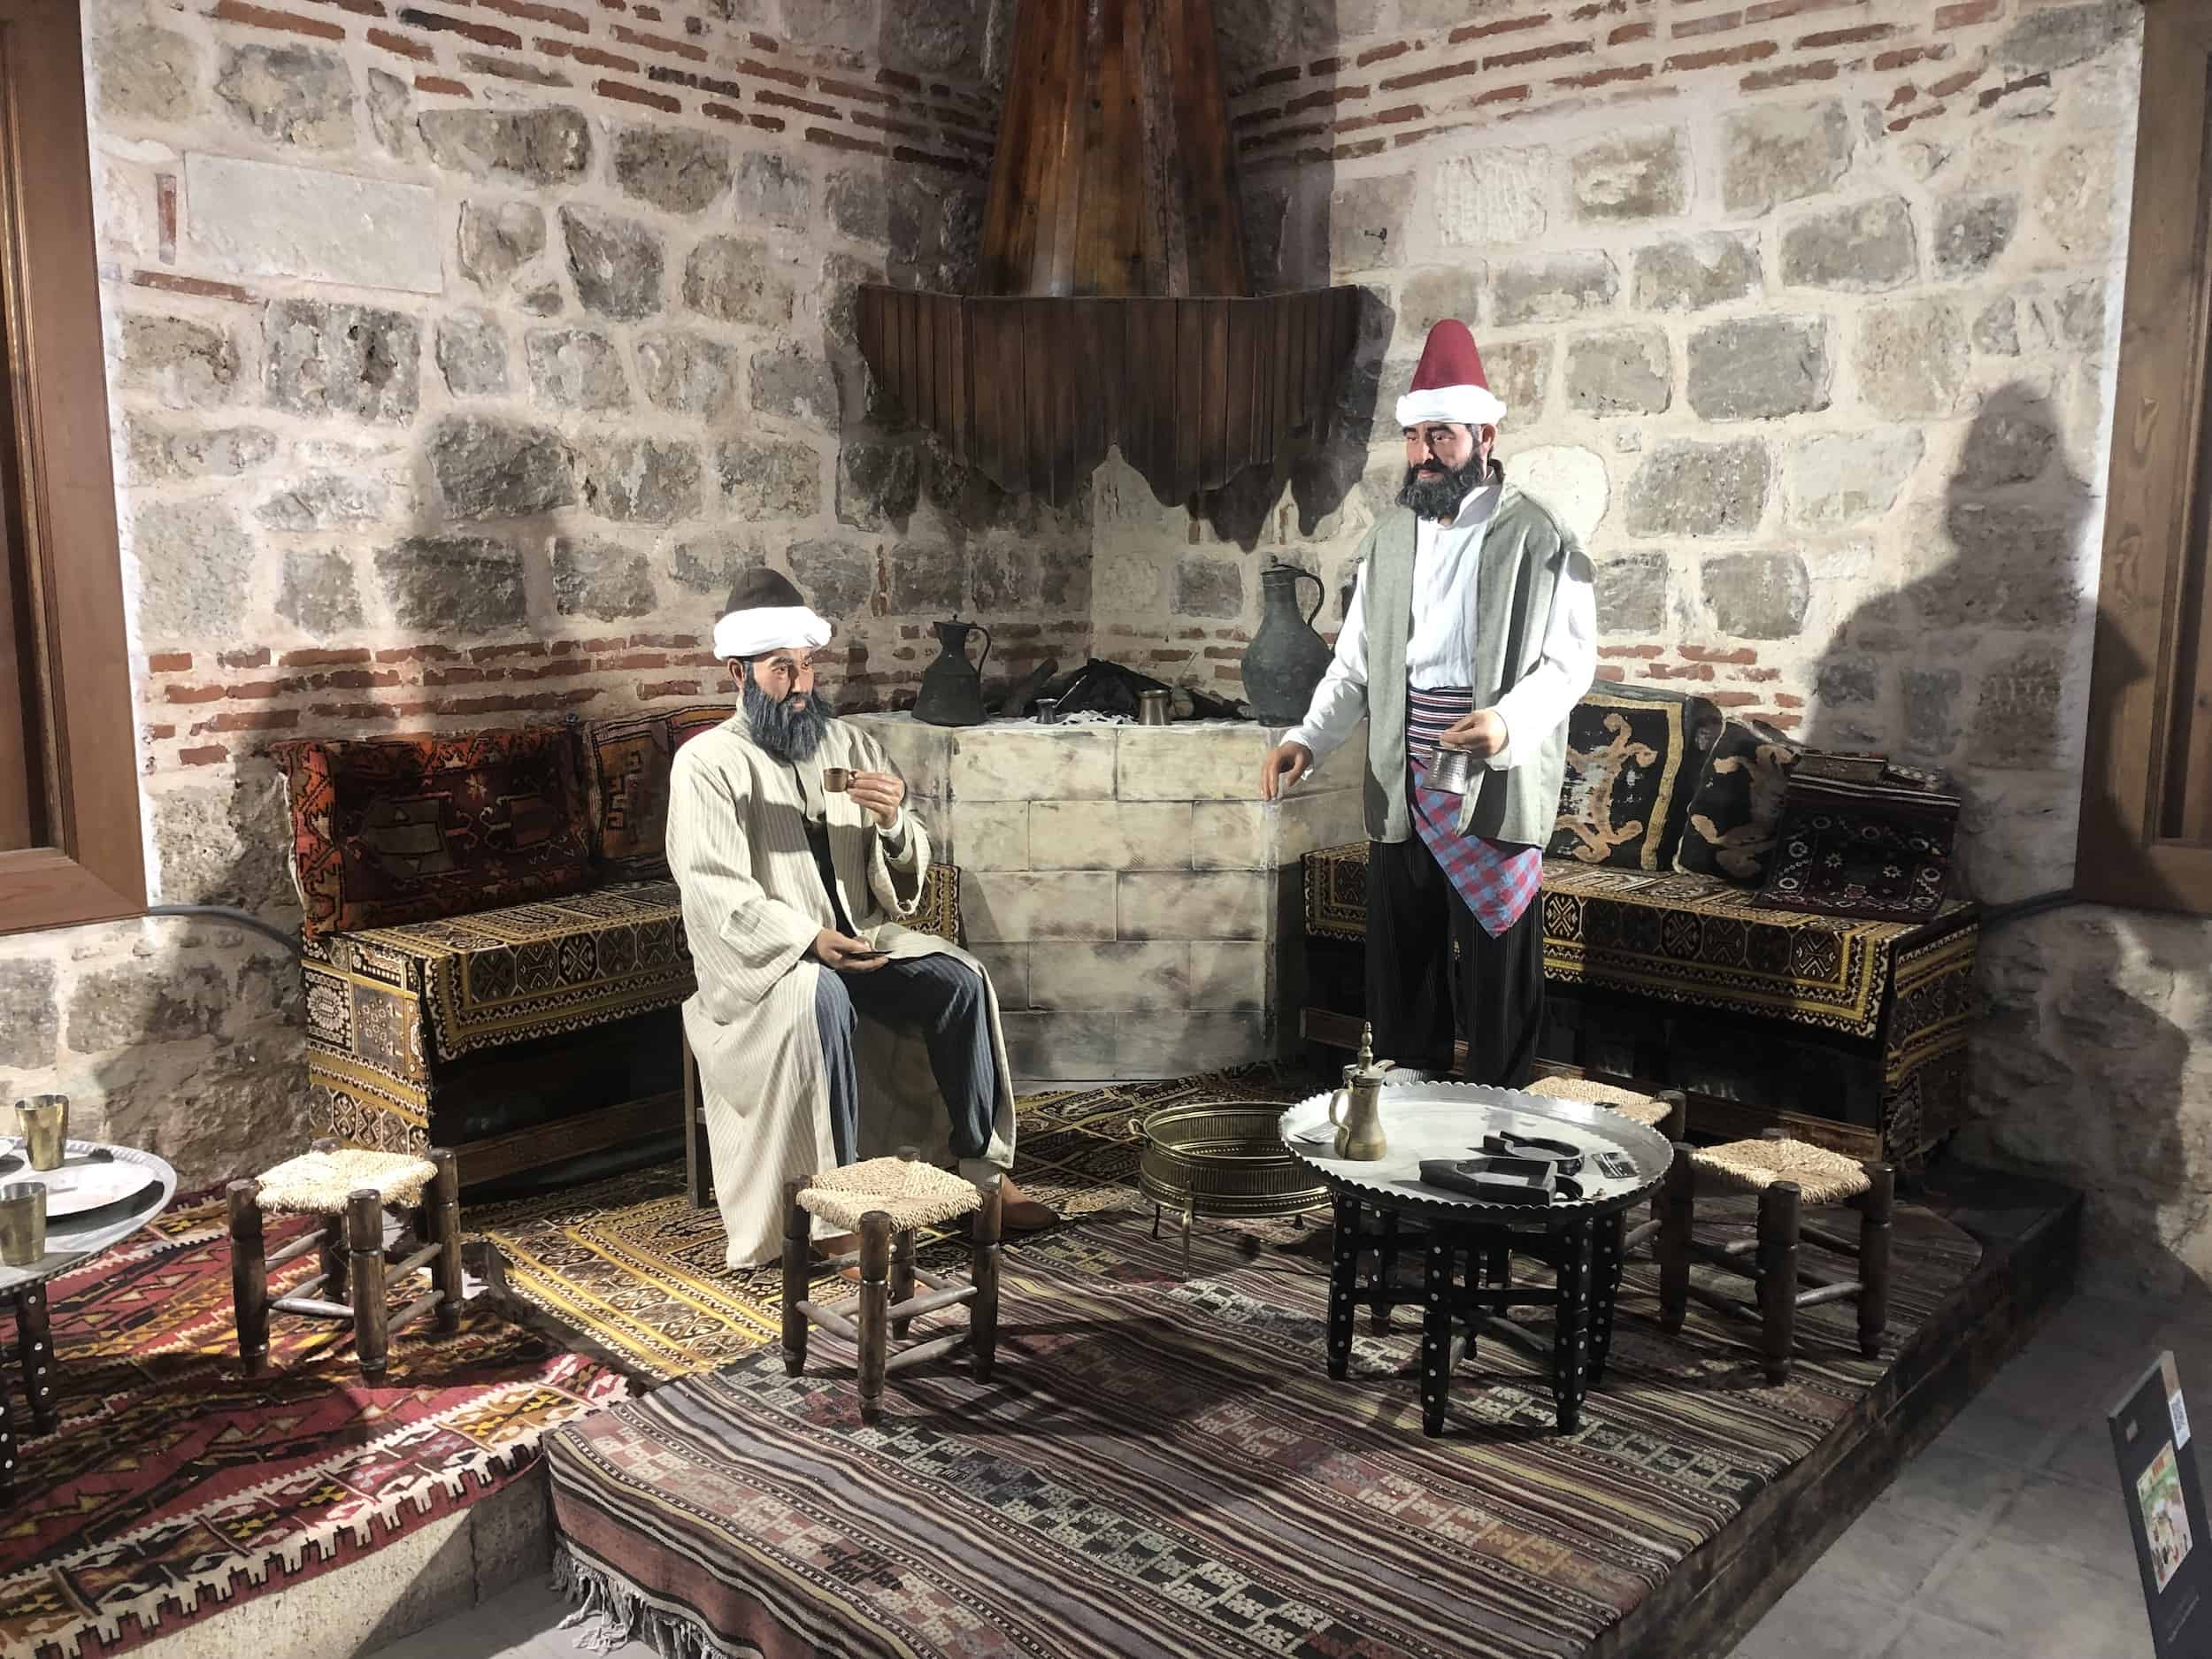 Coffeehouse scene in the soup kitchen at the Bayezid II Complex in Edirne, Turkey